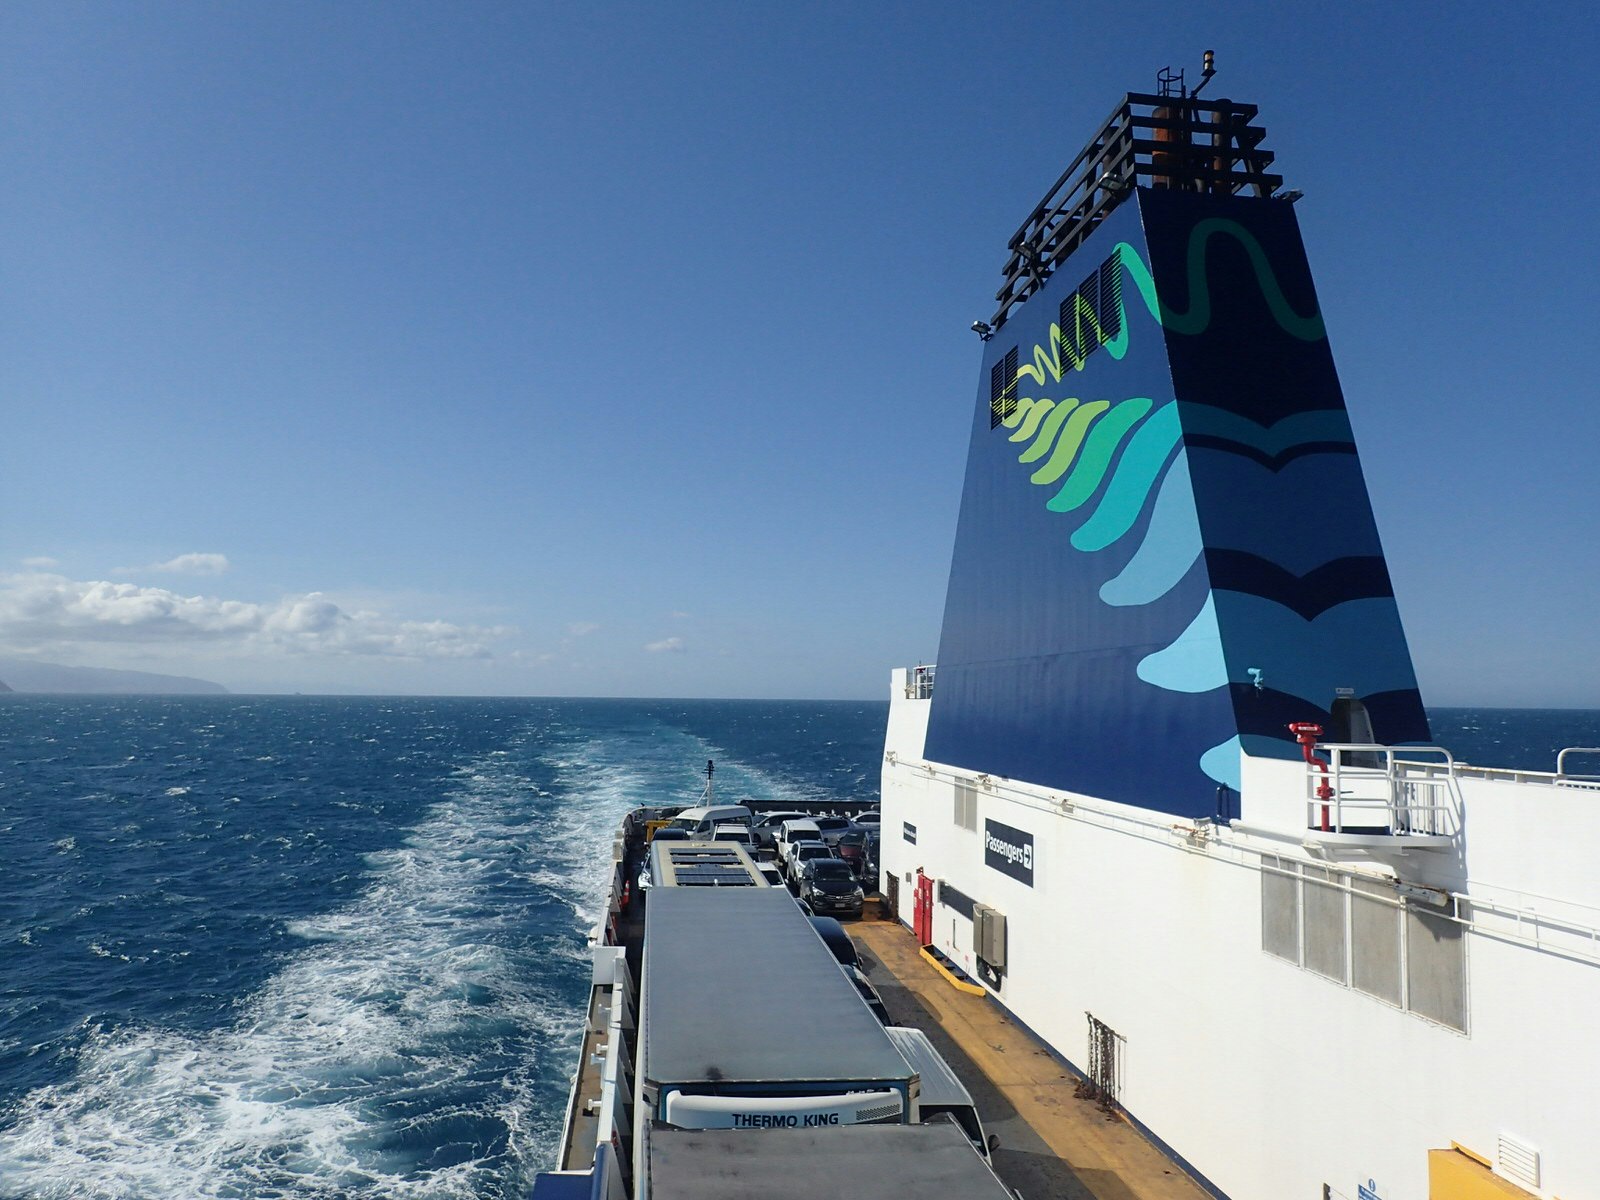 Interislander ferry crossing Cook Strait, New Zealand on a clear day. The photo shows the stern of the boat, churning a white trail through the blue sea.